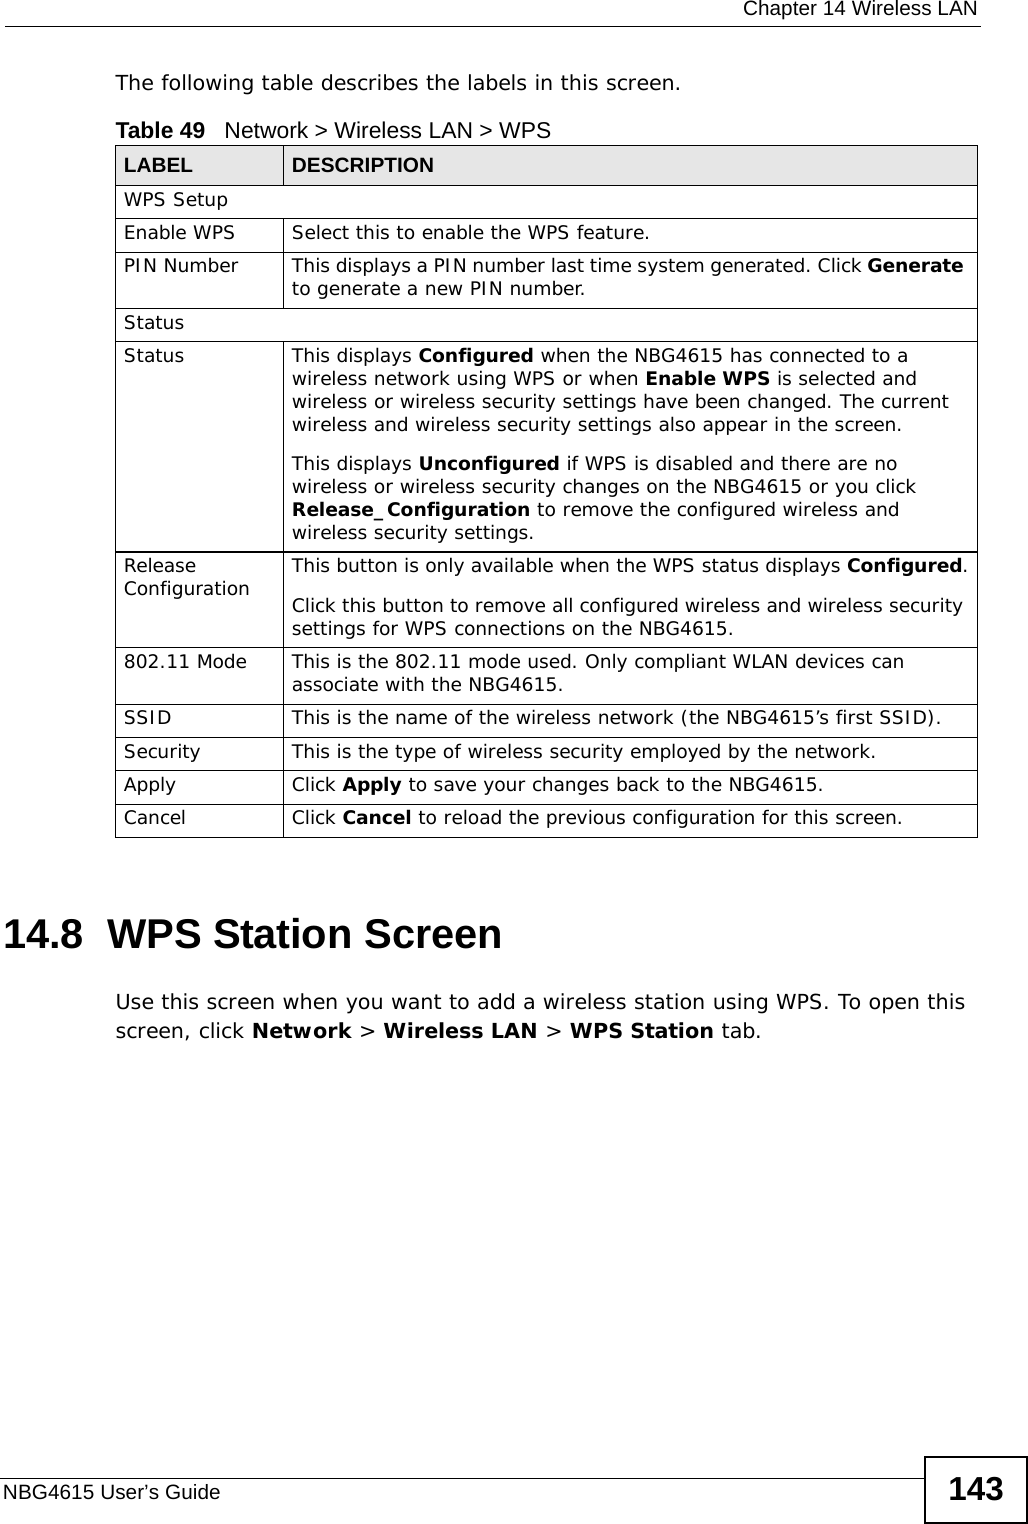  Chapter 14 Wireless LANNBG4615 User’s Guide 143The following table describes the labels in this screen.14.8  WPS Station ScreenUse this screen when you want to add a wireless station using WPS. To open this screen, click Network &gt; Wireless LAN &gt; WPS Station tab.Table 49   Network &gt; Wireless LAN &gt; WPSLABEL DESCRIPTIONWPS SetupEnable WPS Select this to enable the WPS feature.PIN Number This displays a PIN number last time system generated. Click Generate to generate a new PIN number.StatusStatus This displays Configured when the NBG4615 has connected to a wireless network using WPS or when Enable WPS is selected and wireless or wireless security settings have been changed. The current wireless and wireless security settings also appear in the screen.This displays Unconfigured if WPS is disabled and there are no wireless or wireless security changes on the NBG4615 or you click Release_Configuration to remove the configured wireless and wireless security settings.Release Configuration This button is only available when the WPS status displays Configured.Click this button to remove all configured wireless and wireless security settings for WPS connections on the NBG4615.802.11 Mode This is the 802.11 mode used. Only compliant WLAN devices can associate with the NBG4615.SSID This is the name of the wireless network (the NBG4615’s first SSID).Security This is the type of wireless security employed by the network.Apply Click Apply to save your changes back to the NBG4615.Cancel Click Cancel to reload the previous configuration for this screen.